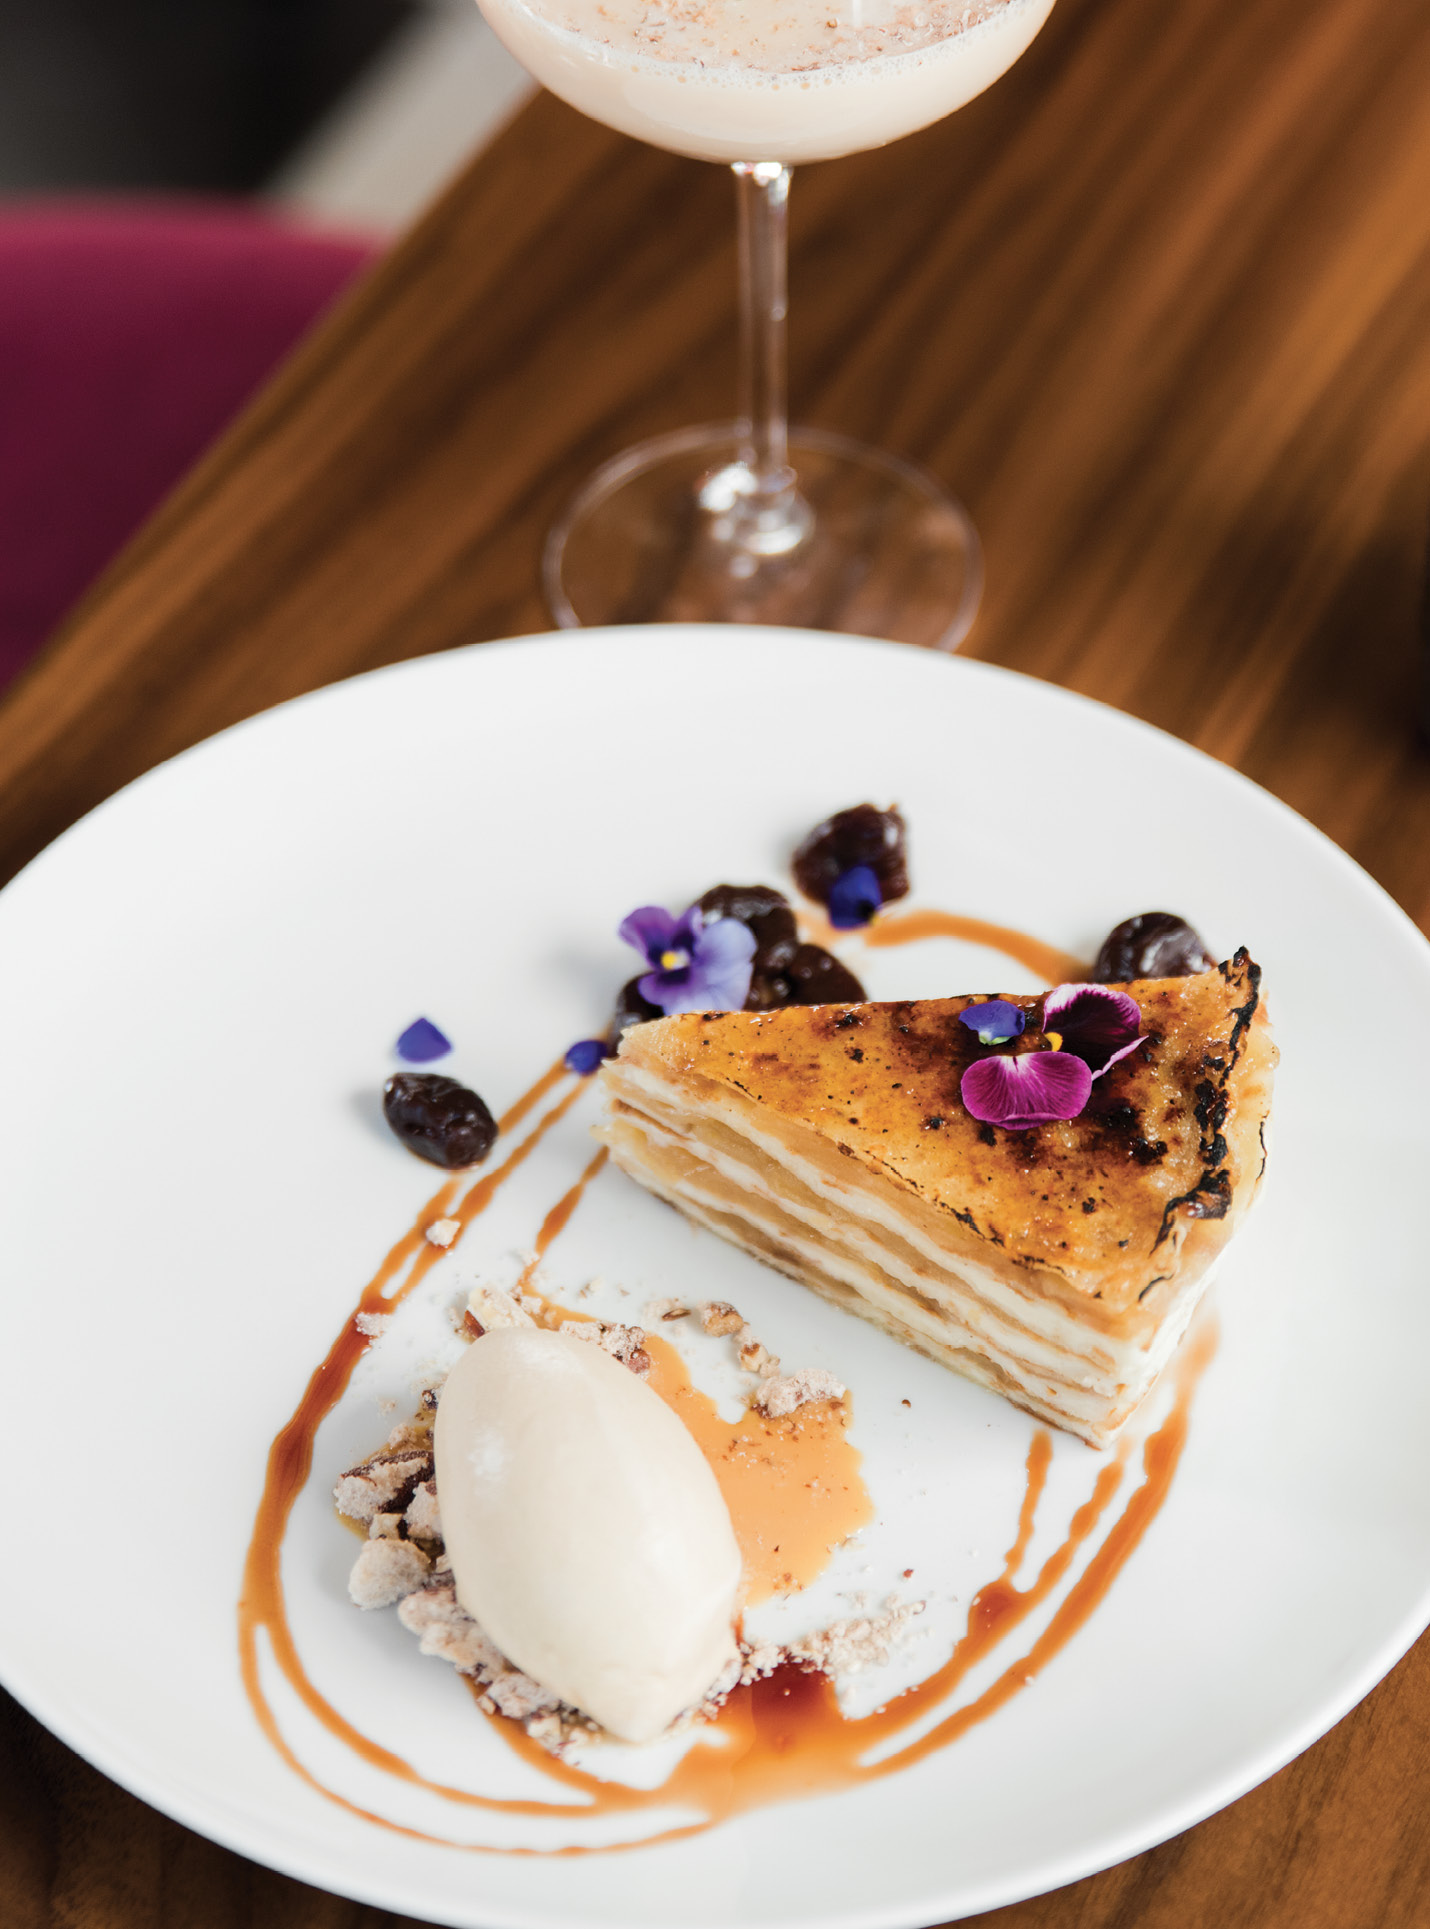 Layered beauty: Pastry chef Jenn McCoy’s flower-adorned apple crêpe cake pairs well with bar manager Ryan Casey’s White Elephant cocktail.